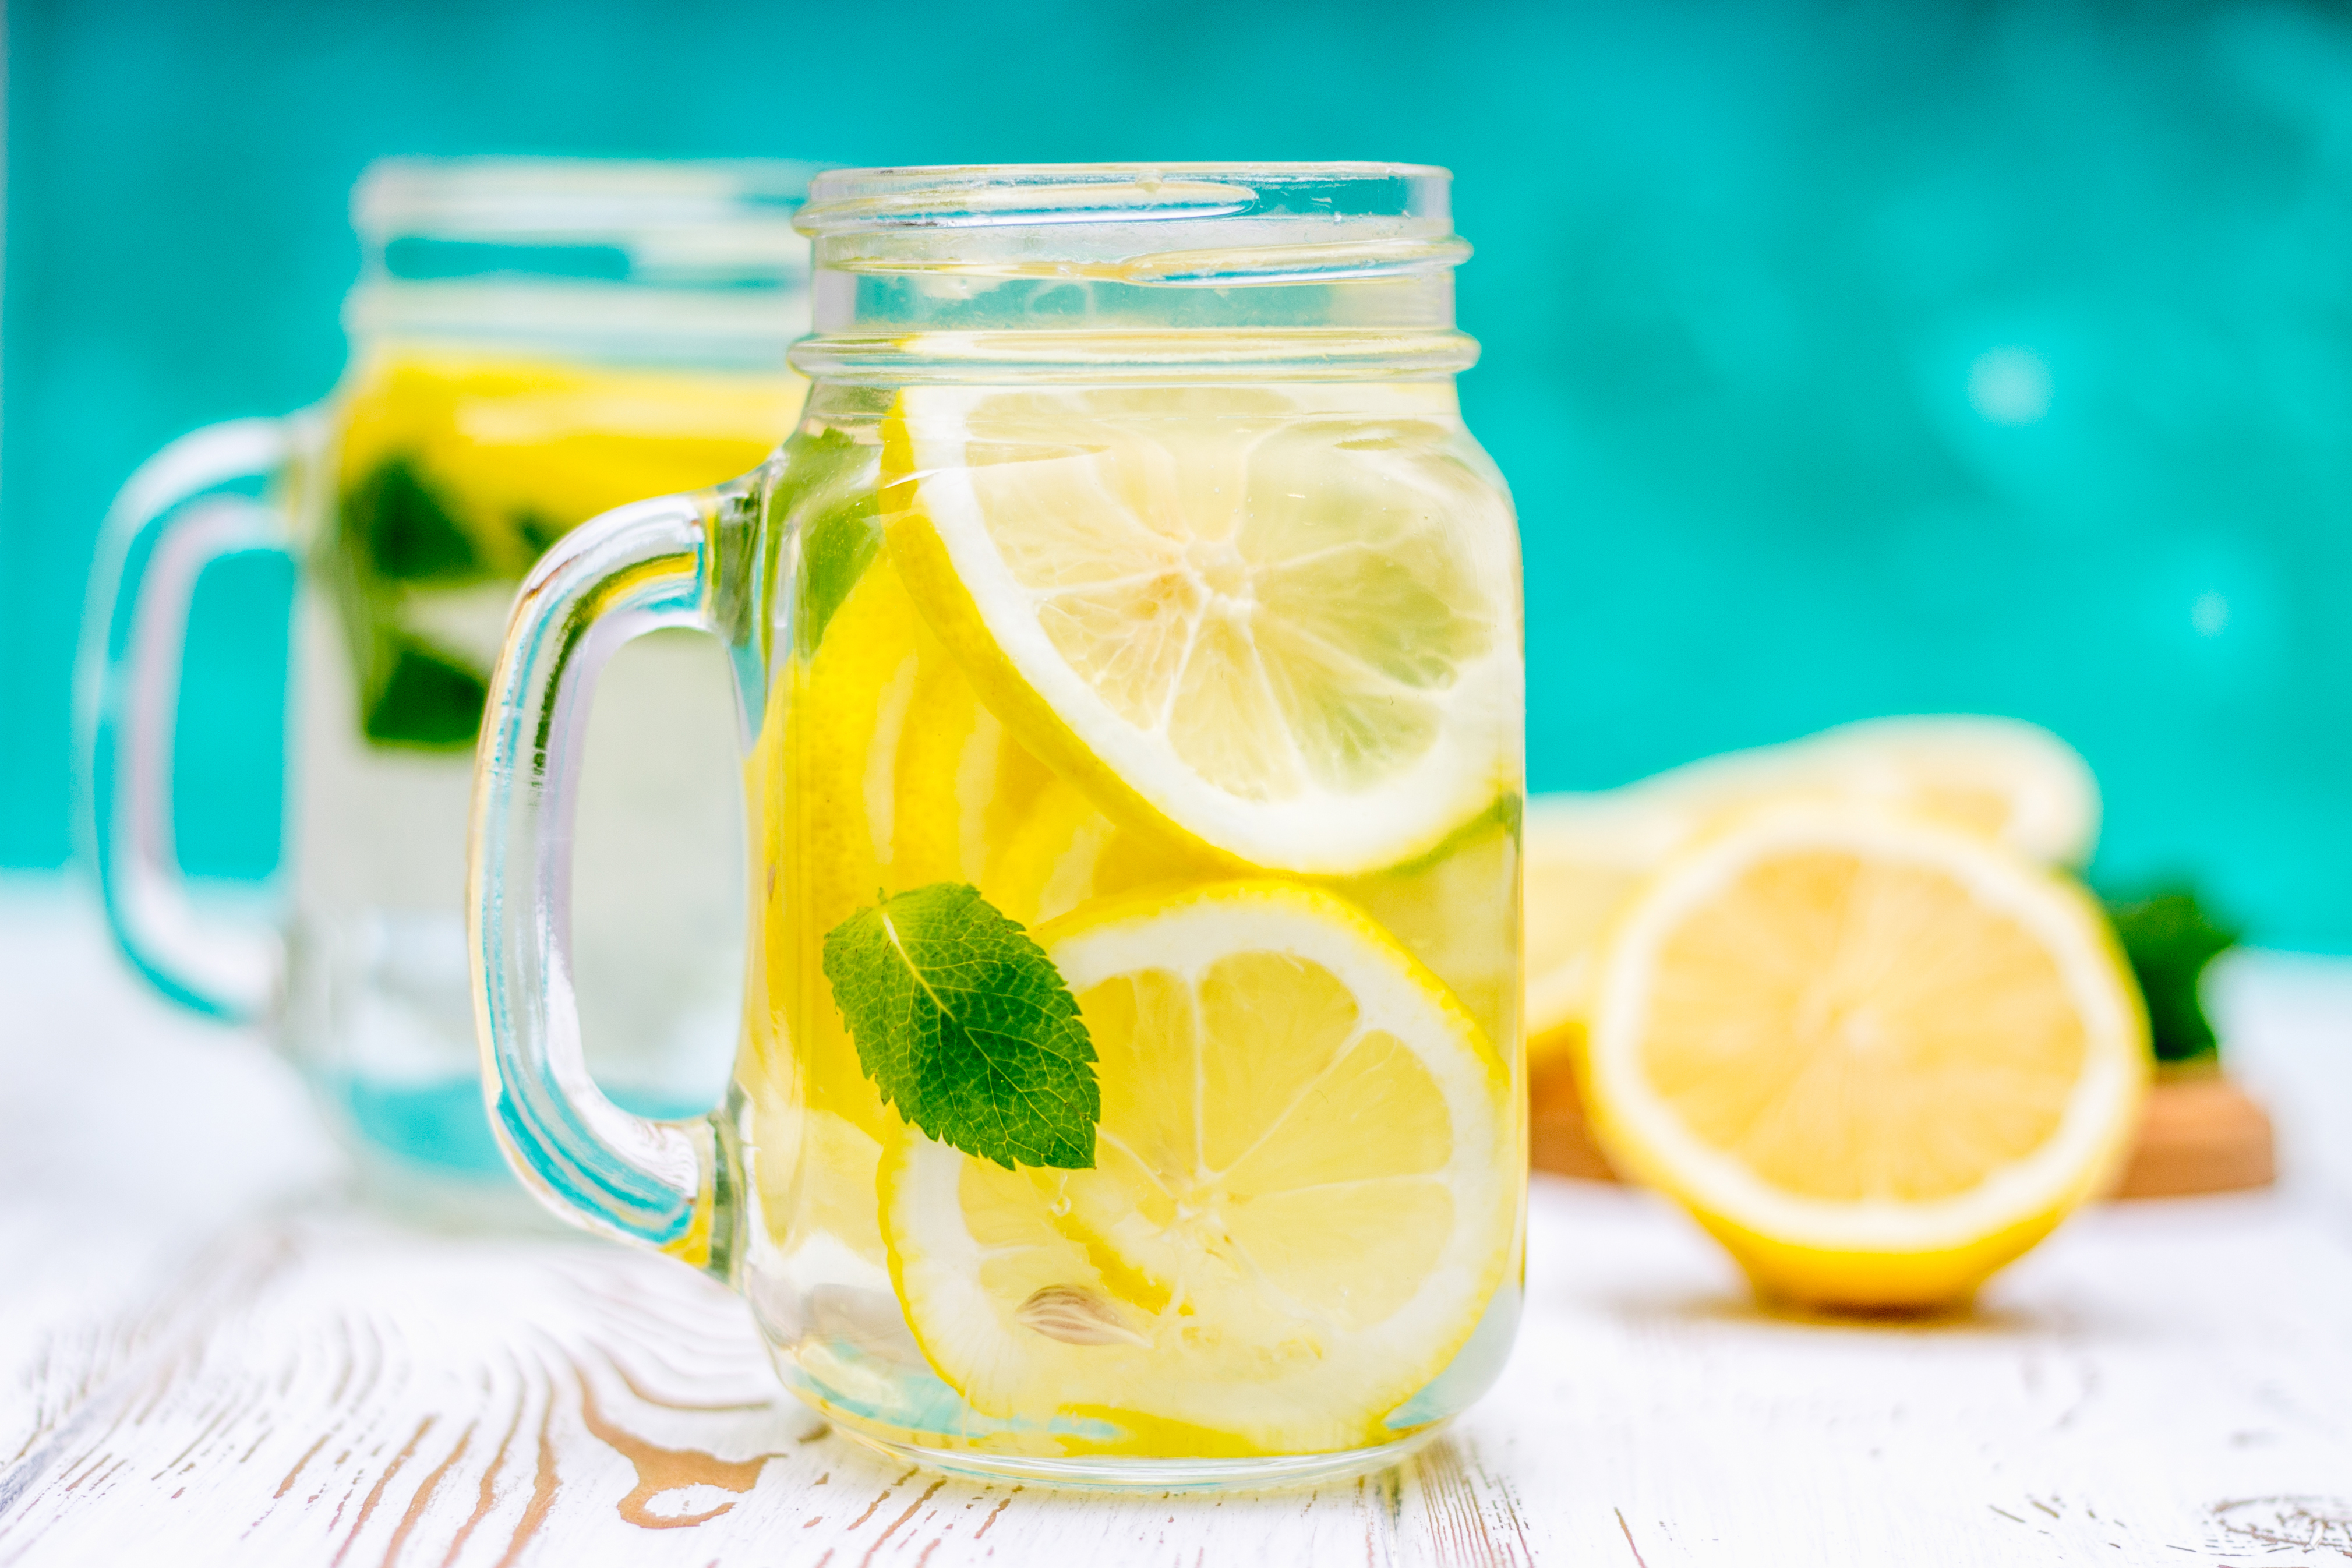 I Drank Lemon Water Every Morning & Noticed These Effects